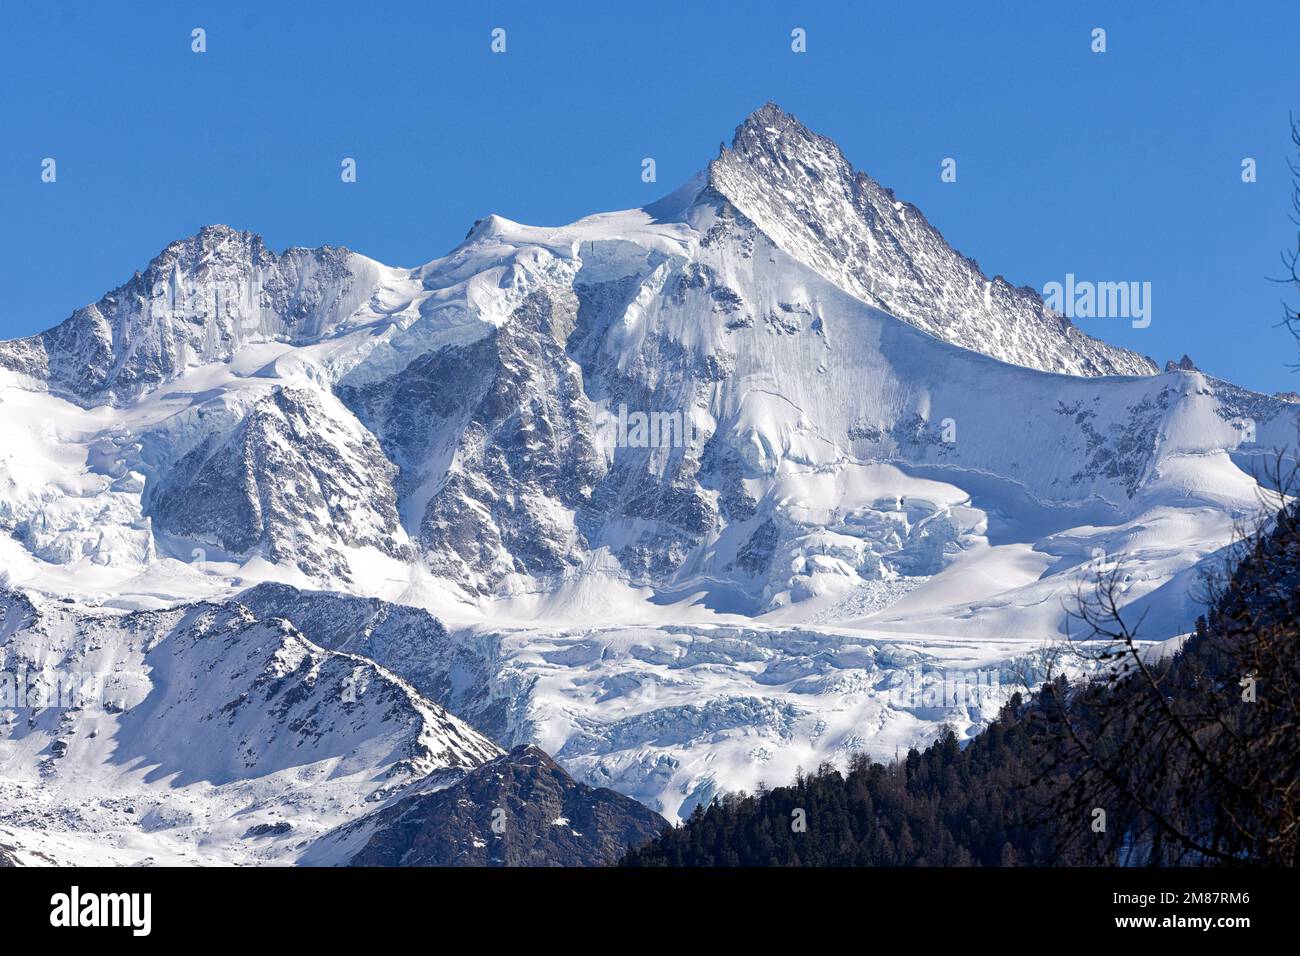 Snowy Zinalrothorn and Moming glacier seen from Grimentz in spring. Grimentz, Val d'Anniviers, Valais, Pennine Alps, Switzerland Stock Photo